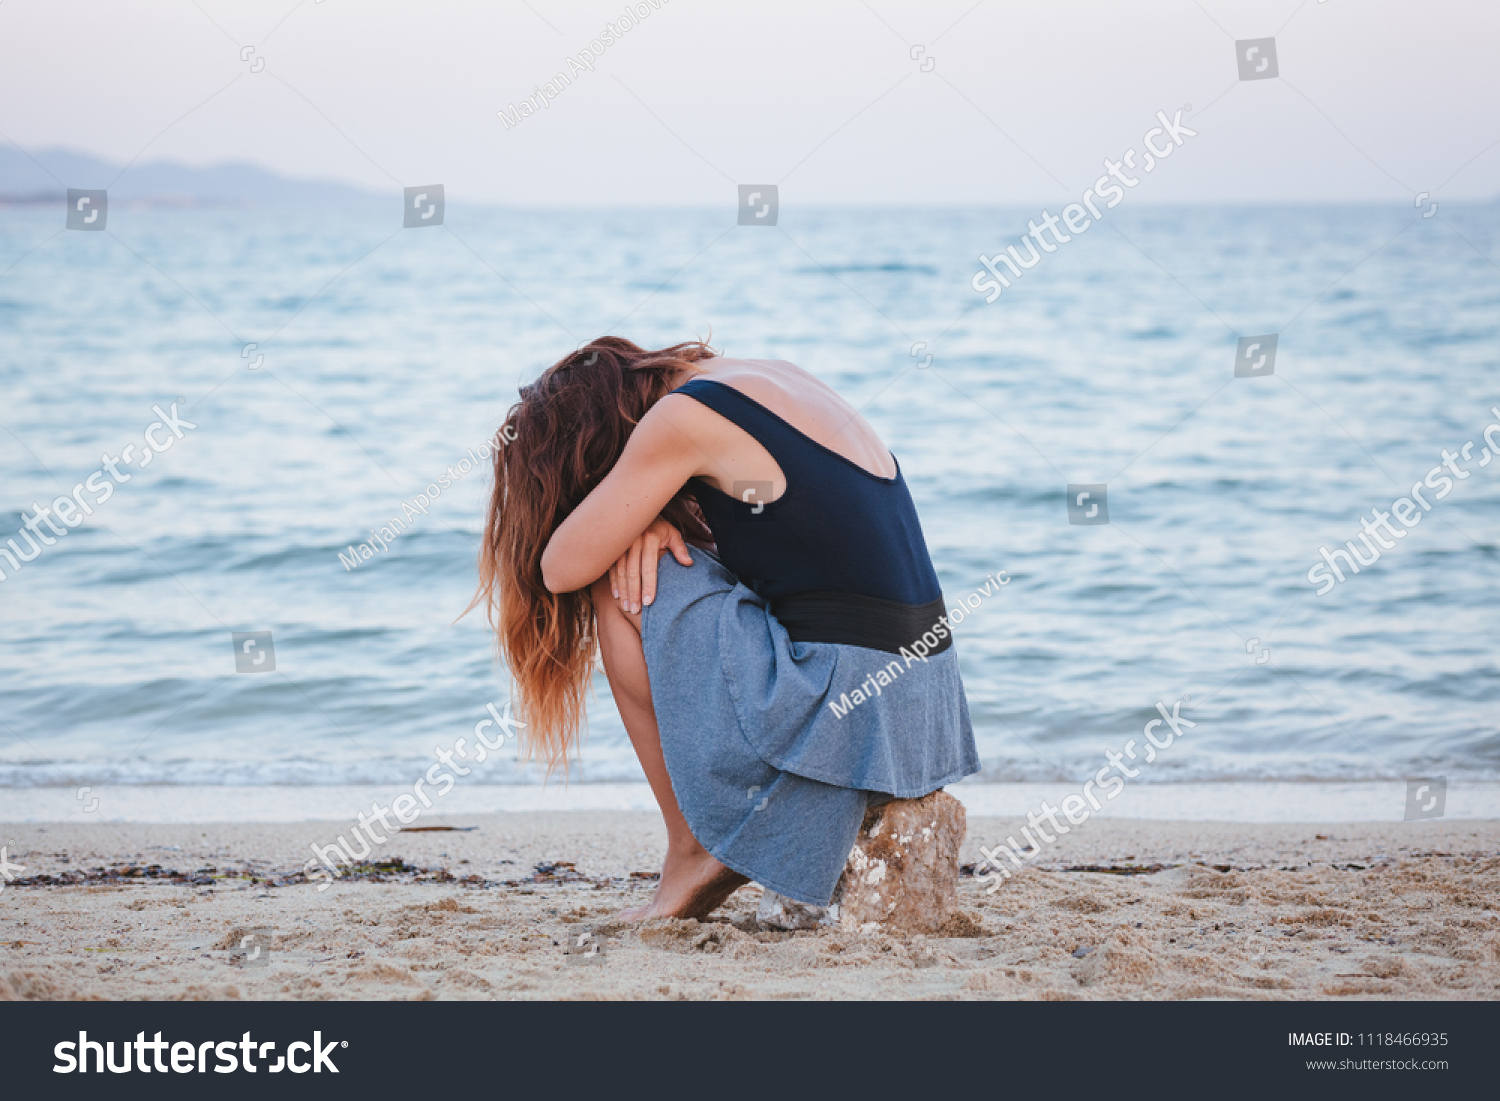 Woman alone and depressed sitting at the beach #1118466935